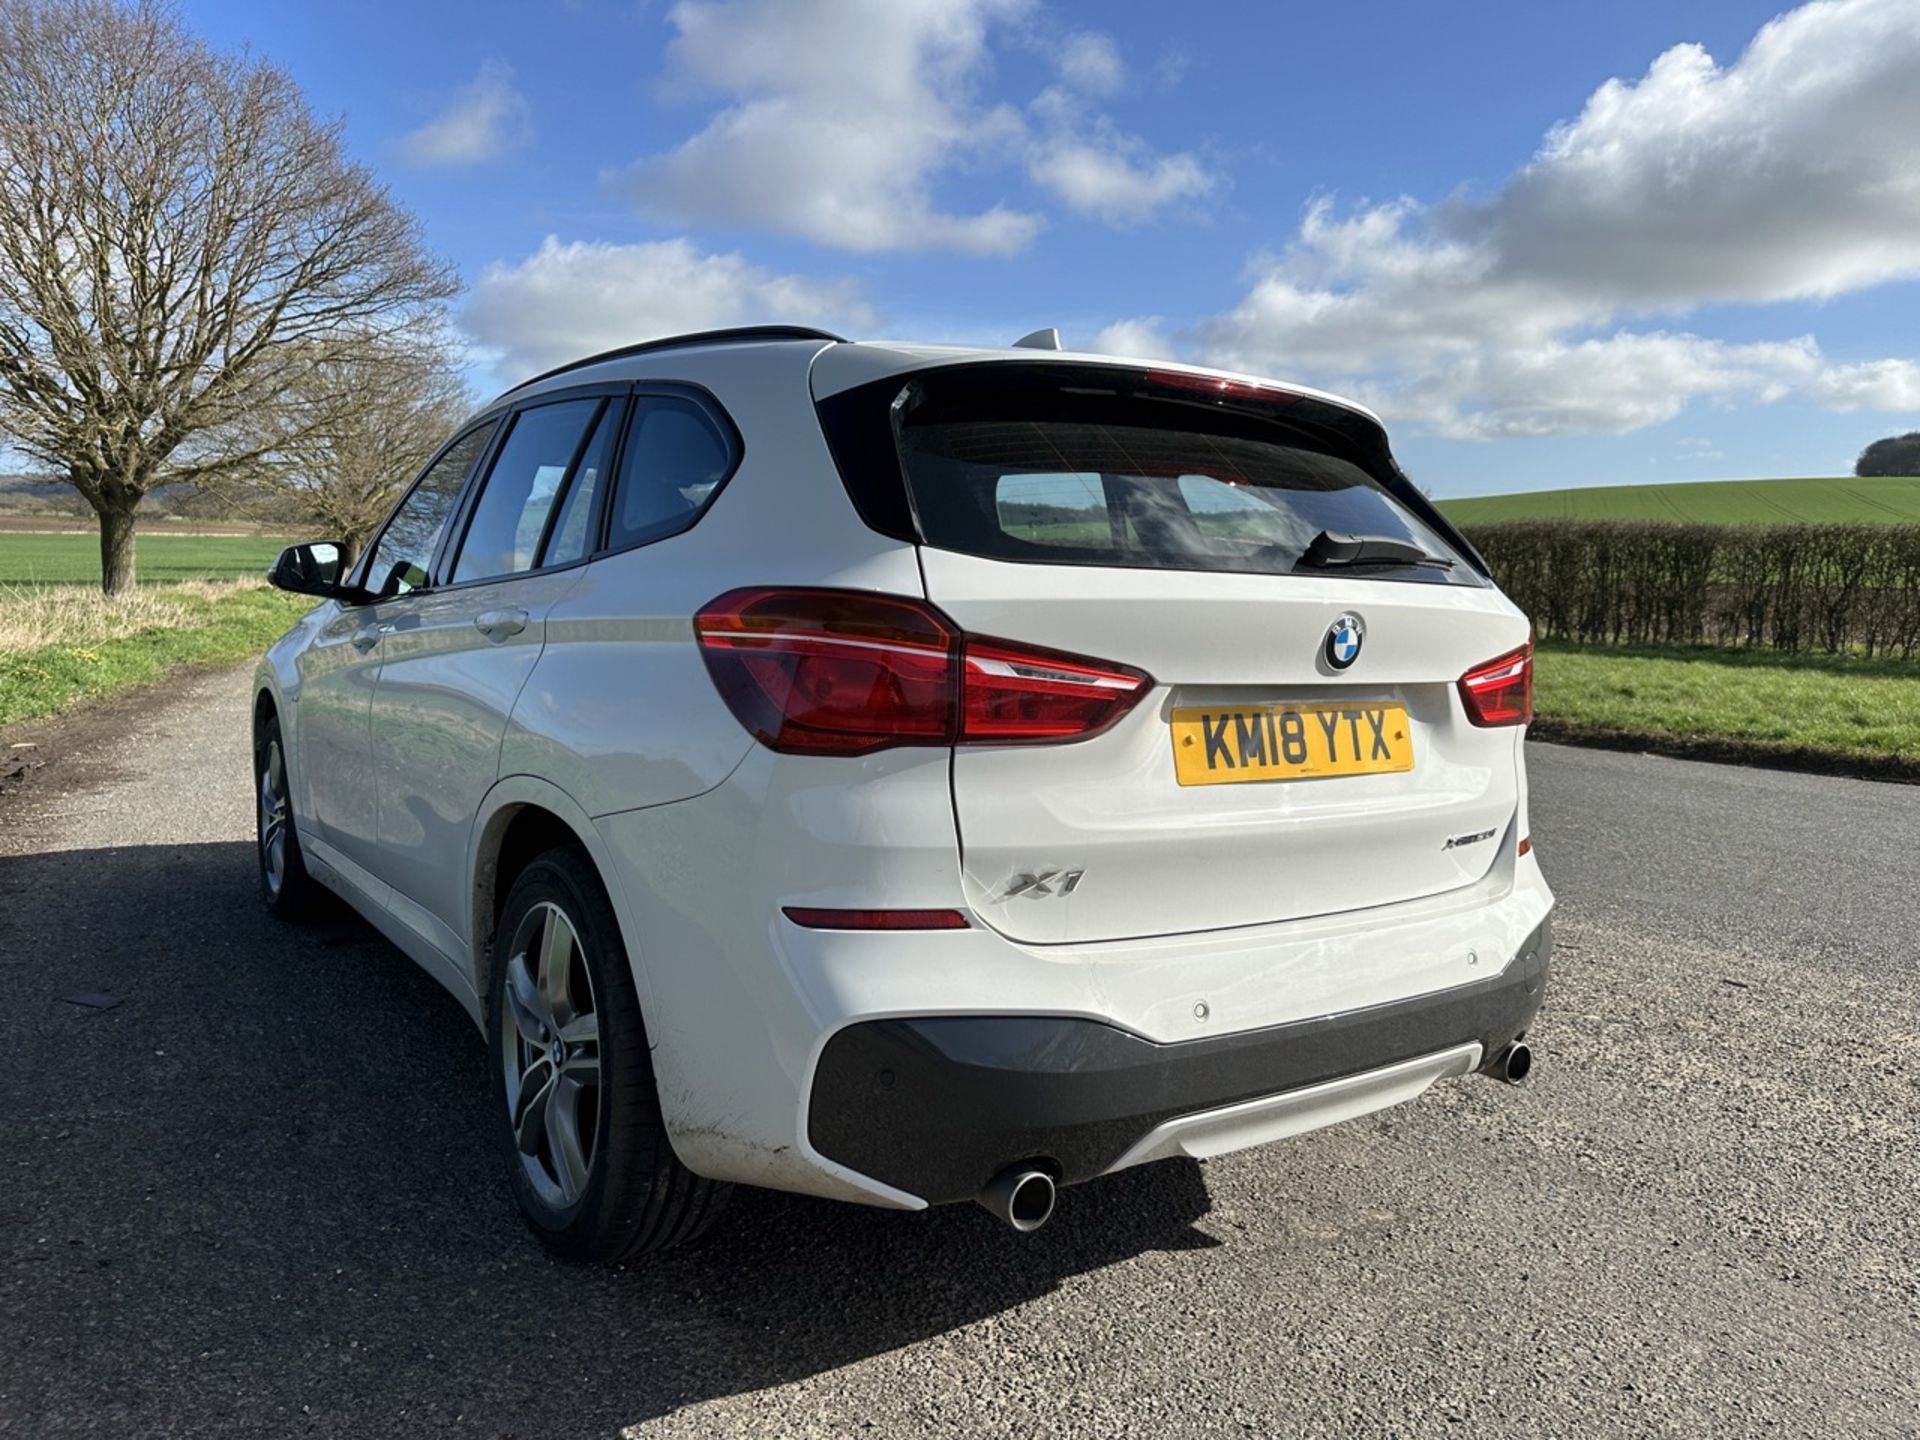 BMW X1 Xdrive20i M Sport Auto 20i - 2018 - 16.5k MILES ONLY - M SPORT Seats/badging - Image 8 of 22